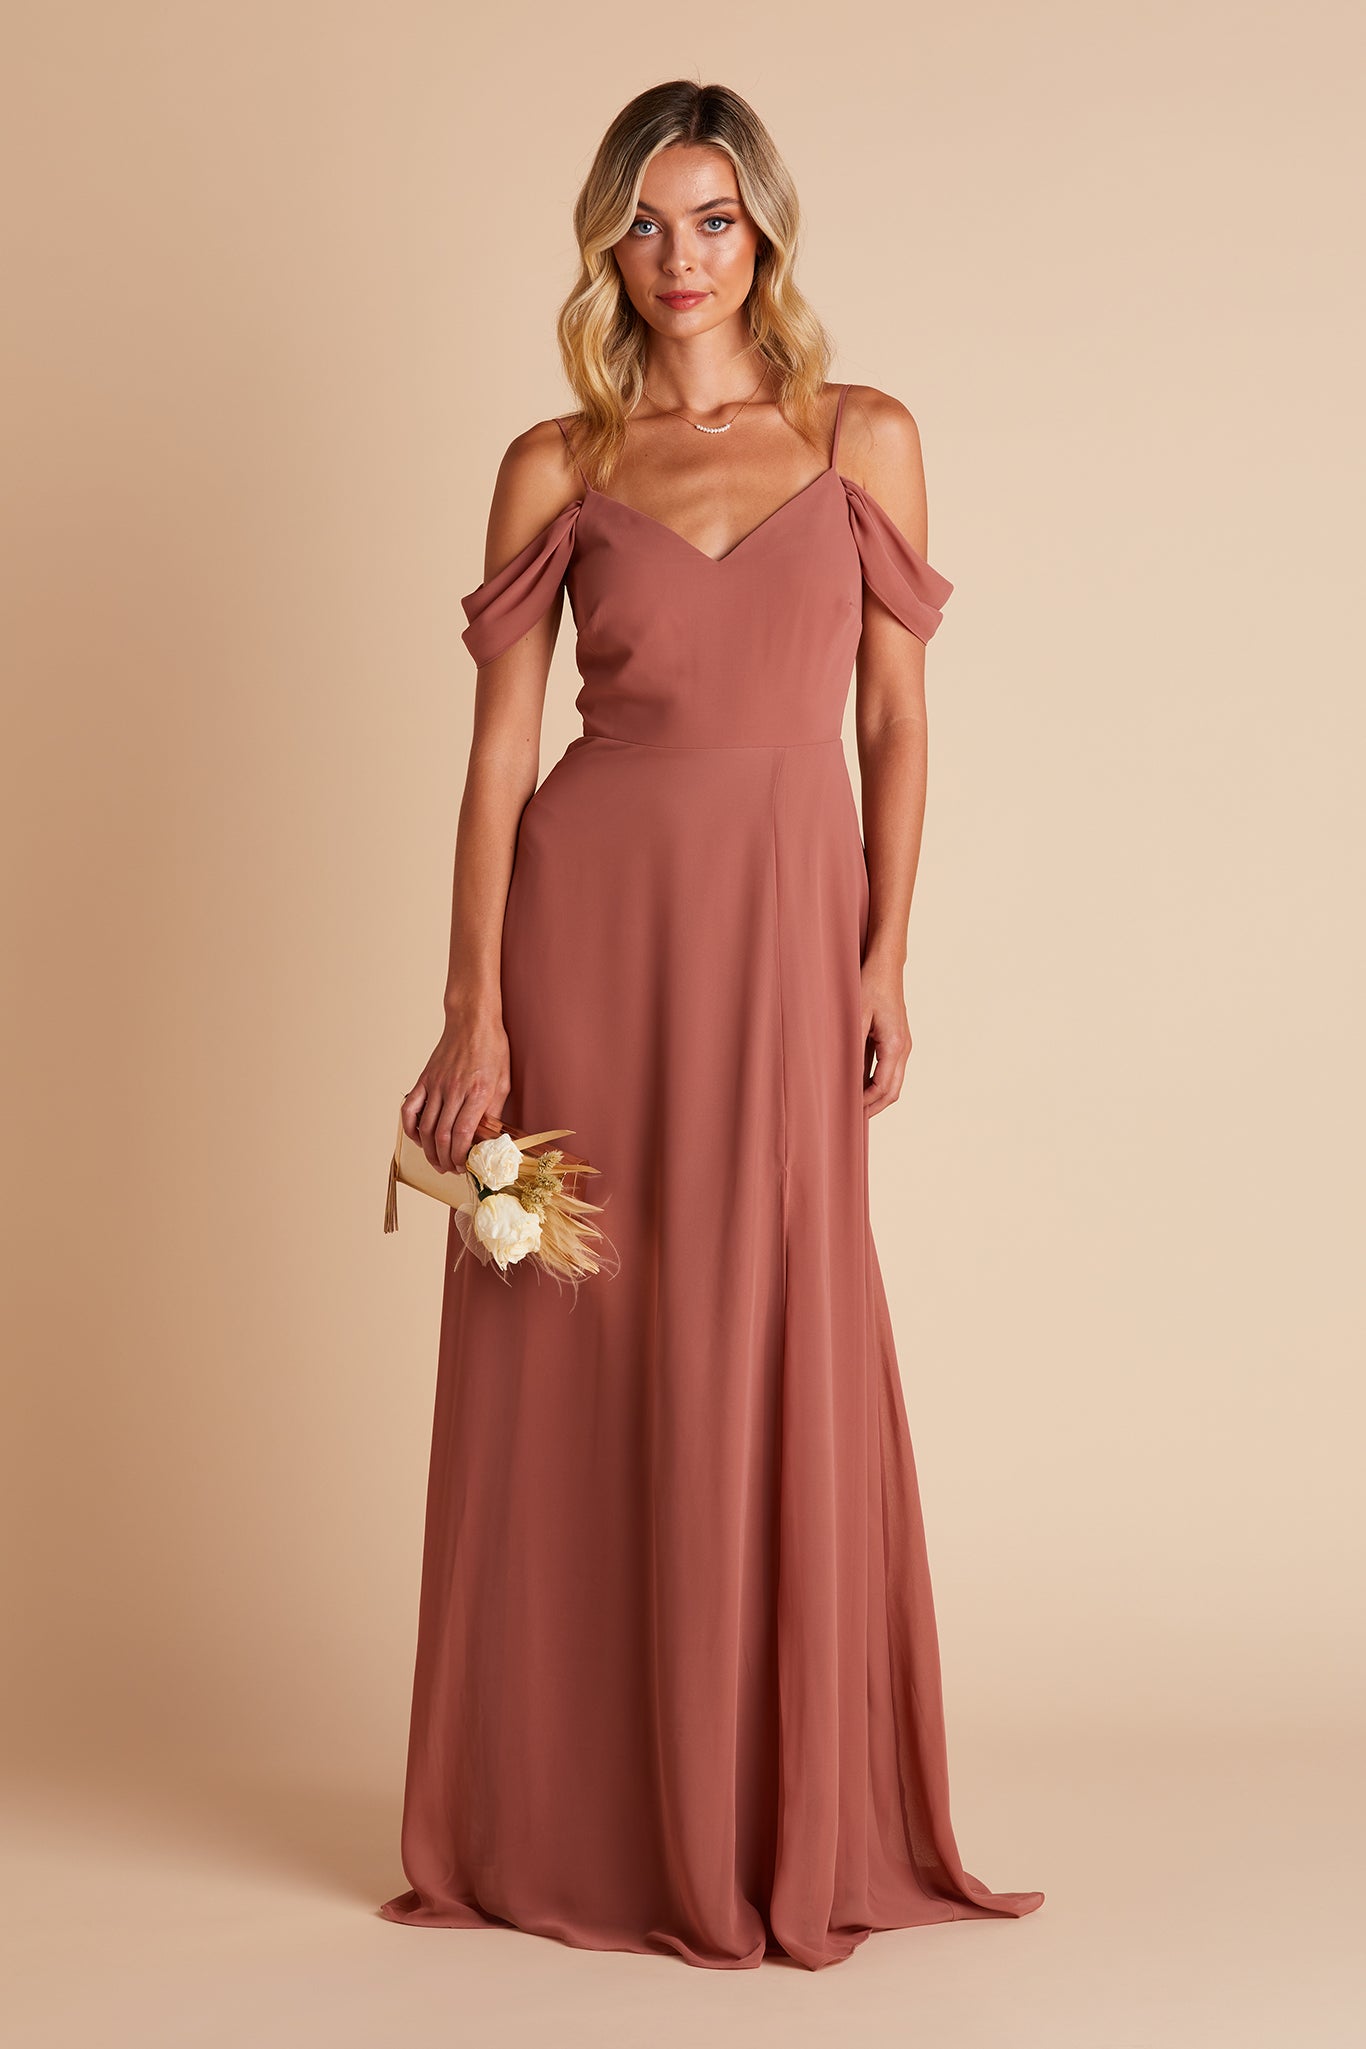 Devin convertible bridesmaid dress with slit in desert rose chiffon by Birdy Grey, front view